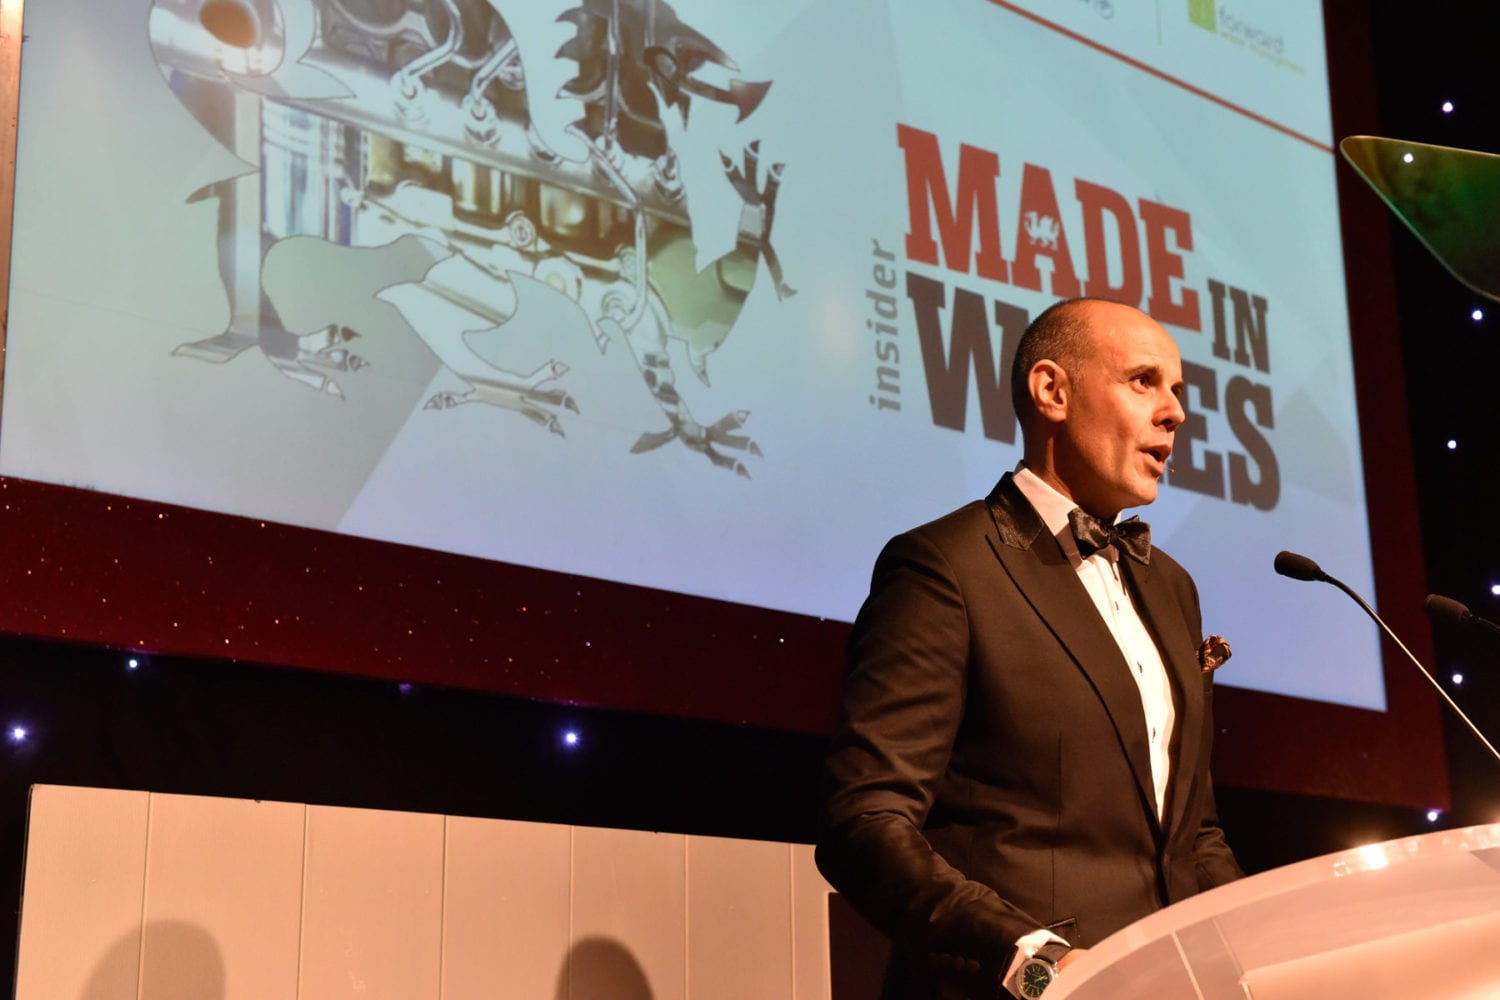 Genesis Biosciences is shortlisted for a Made in Wales 2016 award